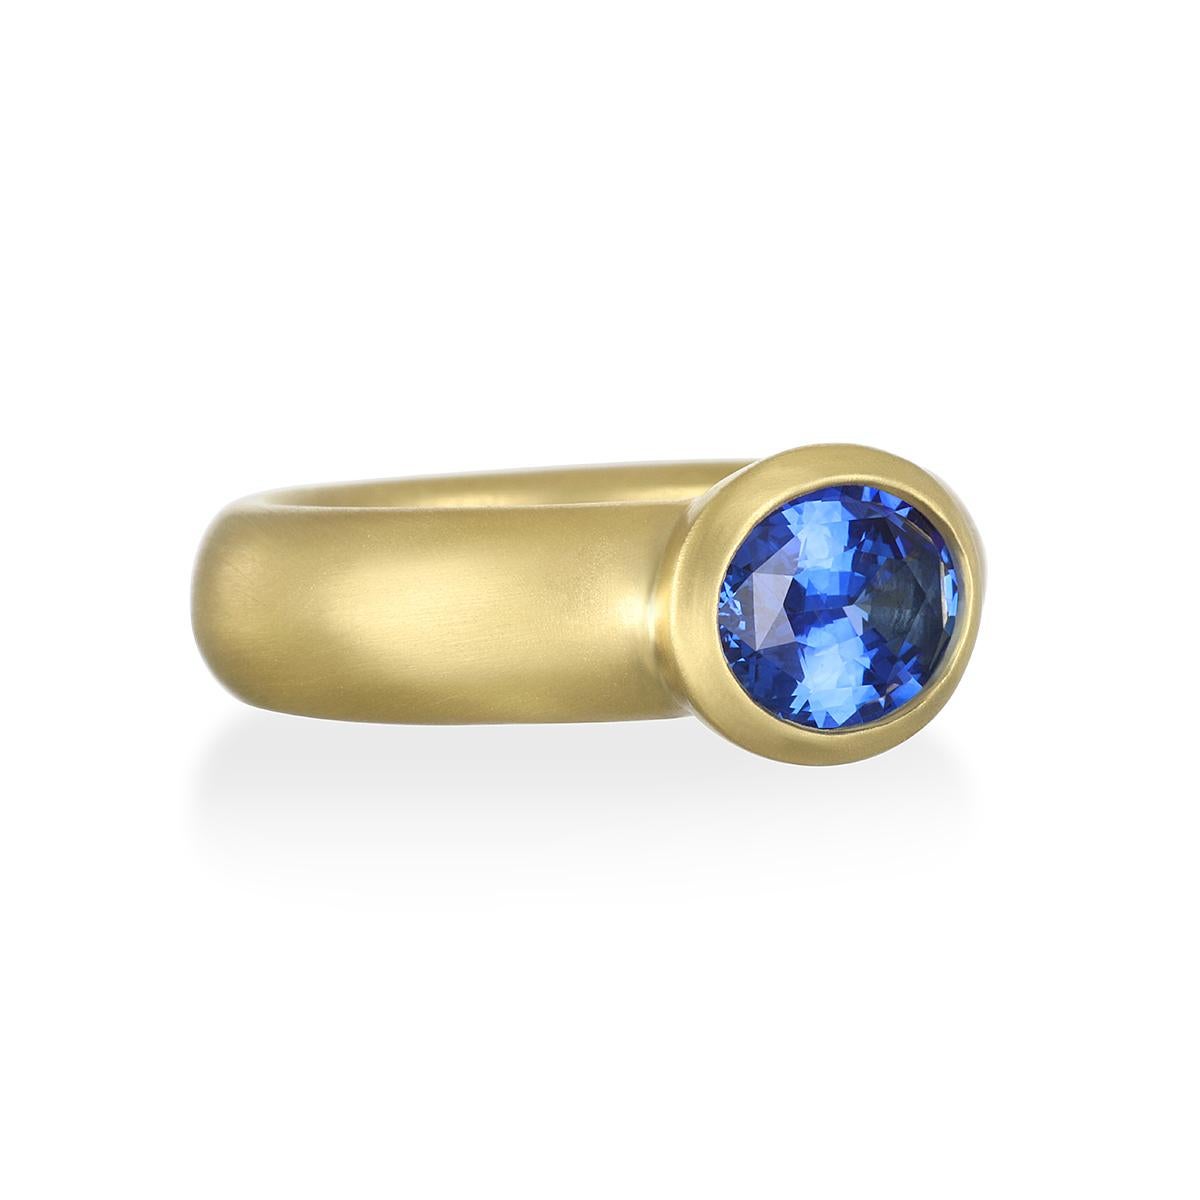 A beautiful, vivid shade of blue, this Sapphire ring is bezel set in 18K gold* with a matte finish for a clean, timeless look. It can be worn alone as a statement piece or stacked with other rings. Model pictured wearing similar style